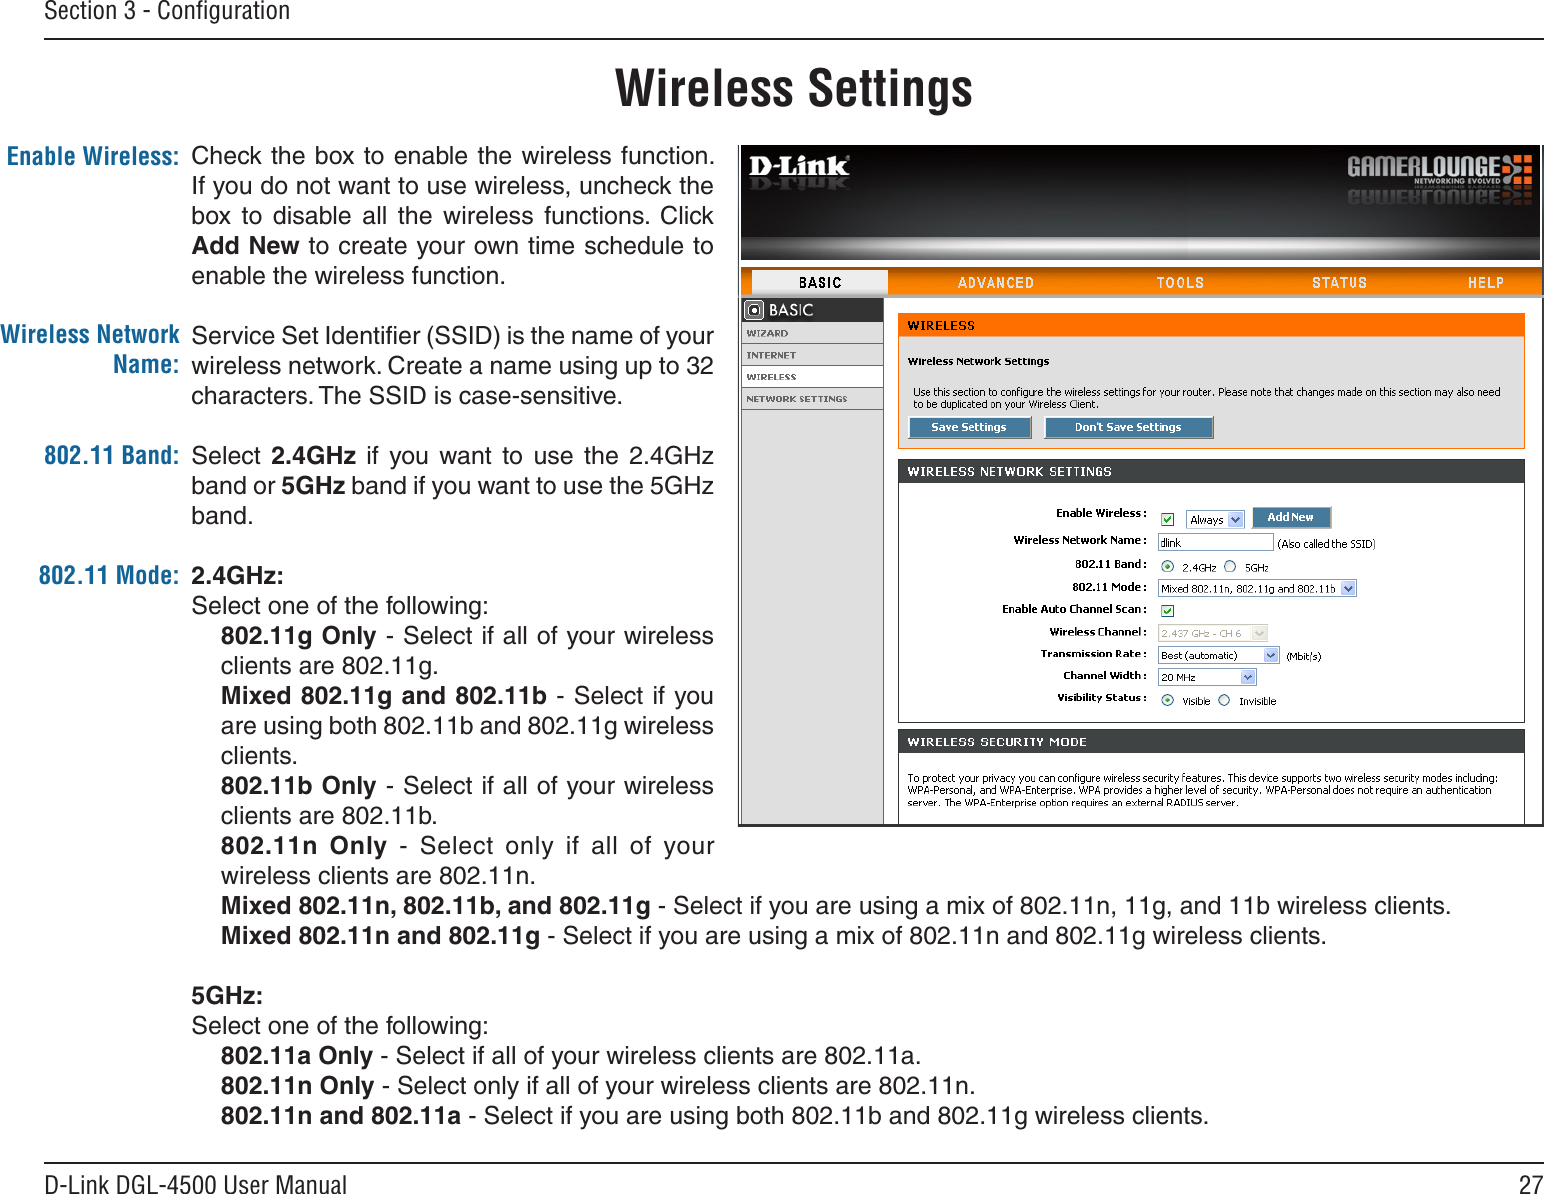 27D-Link DGL-4500 User ManualSection 3 - ConﬁgurationCheck the box to enable the wireless function. If you do not want to use wireless, uncheck the box  to  disable  all  the  wireless  functions.  Click Add New to create your own time schedule to enable the wireless function. Service Set Identiﬁer (SSID) is the name of your wireless network. Create a name using up to 32 characters. The SSID is case-sensitive.Select  2.4GHz  if  you  want  to  use  the  2.4GHz band or 5GHz band if you want to use the 5GHz band. 2.4GHz:Select one of the following:802.11g Only - Select if all of your wireless clients are 802.11g.Mixed 802.11g and 802.11b - Select if you are using both 802.11b and 802.11g wireless clients.802.11b Only - Select if all of your wireless clients are 802.11b.802.11n  Only  -  Select  only  if  all  of  your wireless clients are 802.11n.Mixed 802.11n, 802.11b, and 802.11g - Select if you are using a mix of 802.11n, 11g, and 11b wireless clients.Mixed 802.11n and 802.11g - Select if you are using a mix of 802.11n and 802.11g wireless clients.5GHz:Select one of the following:802.11a Only - Select if all of your wireless clients are 802.11a.802.11n Only - Select only if all of your wireless clients are 802.11n.802.11n and 802.11a - Select if you are using both 802.11b and 802.11g wireless clients.Enable Wireless:Wireless SettingsWireless Network Name:802.11 Mode:802.11 Band: